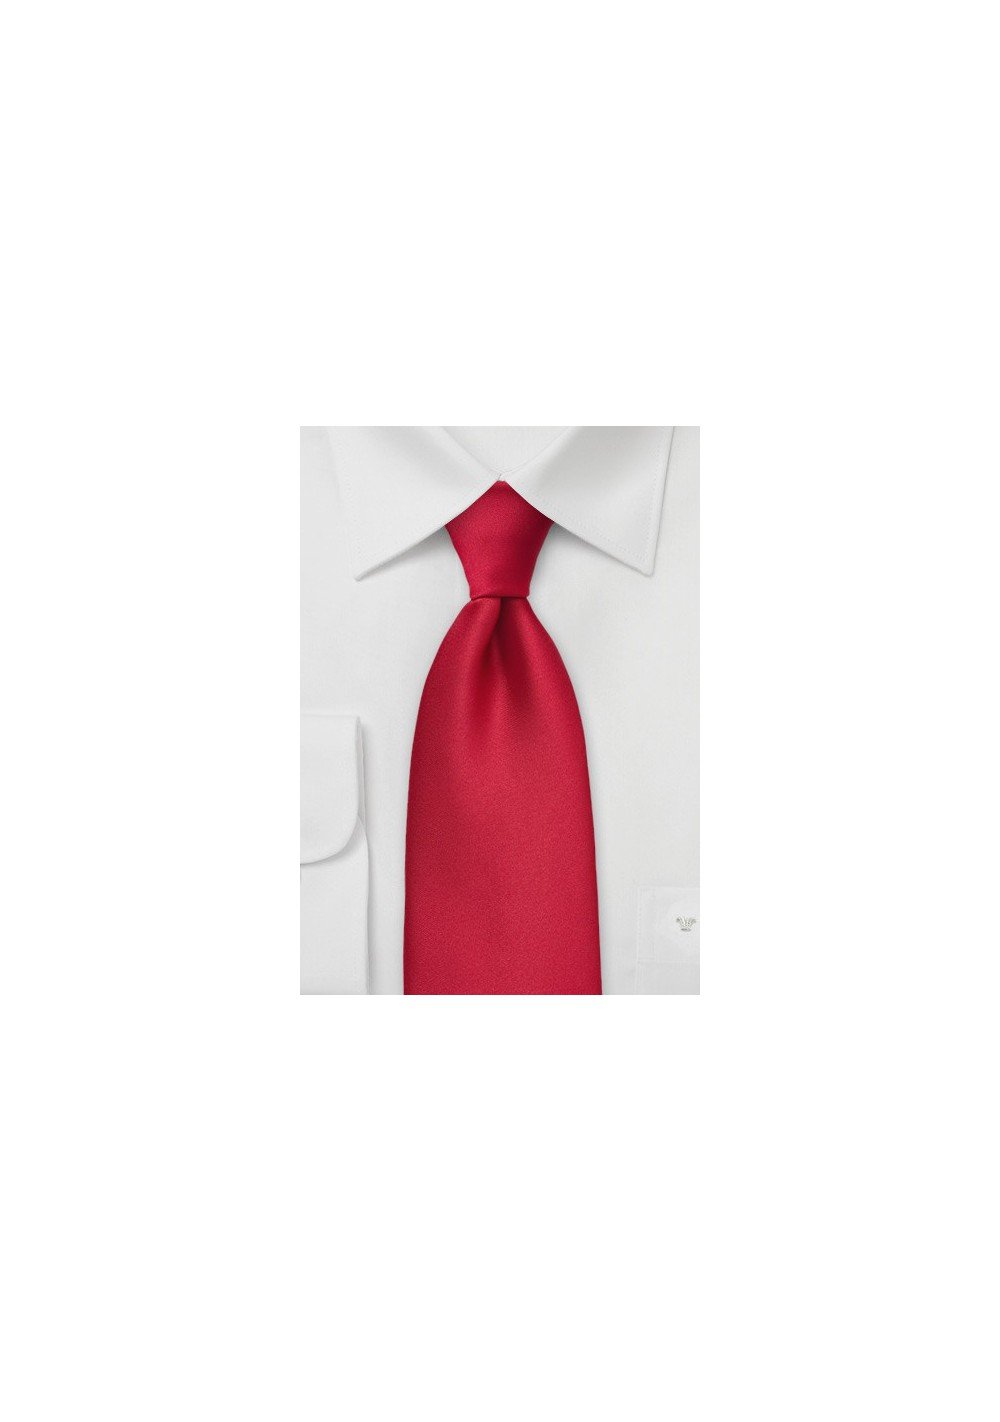 Solid Cherry Red Mens Tie